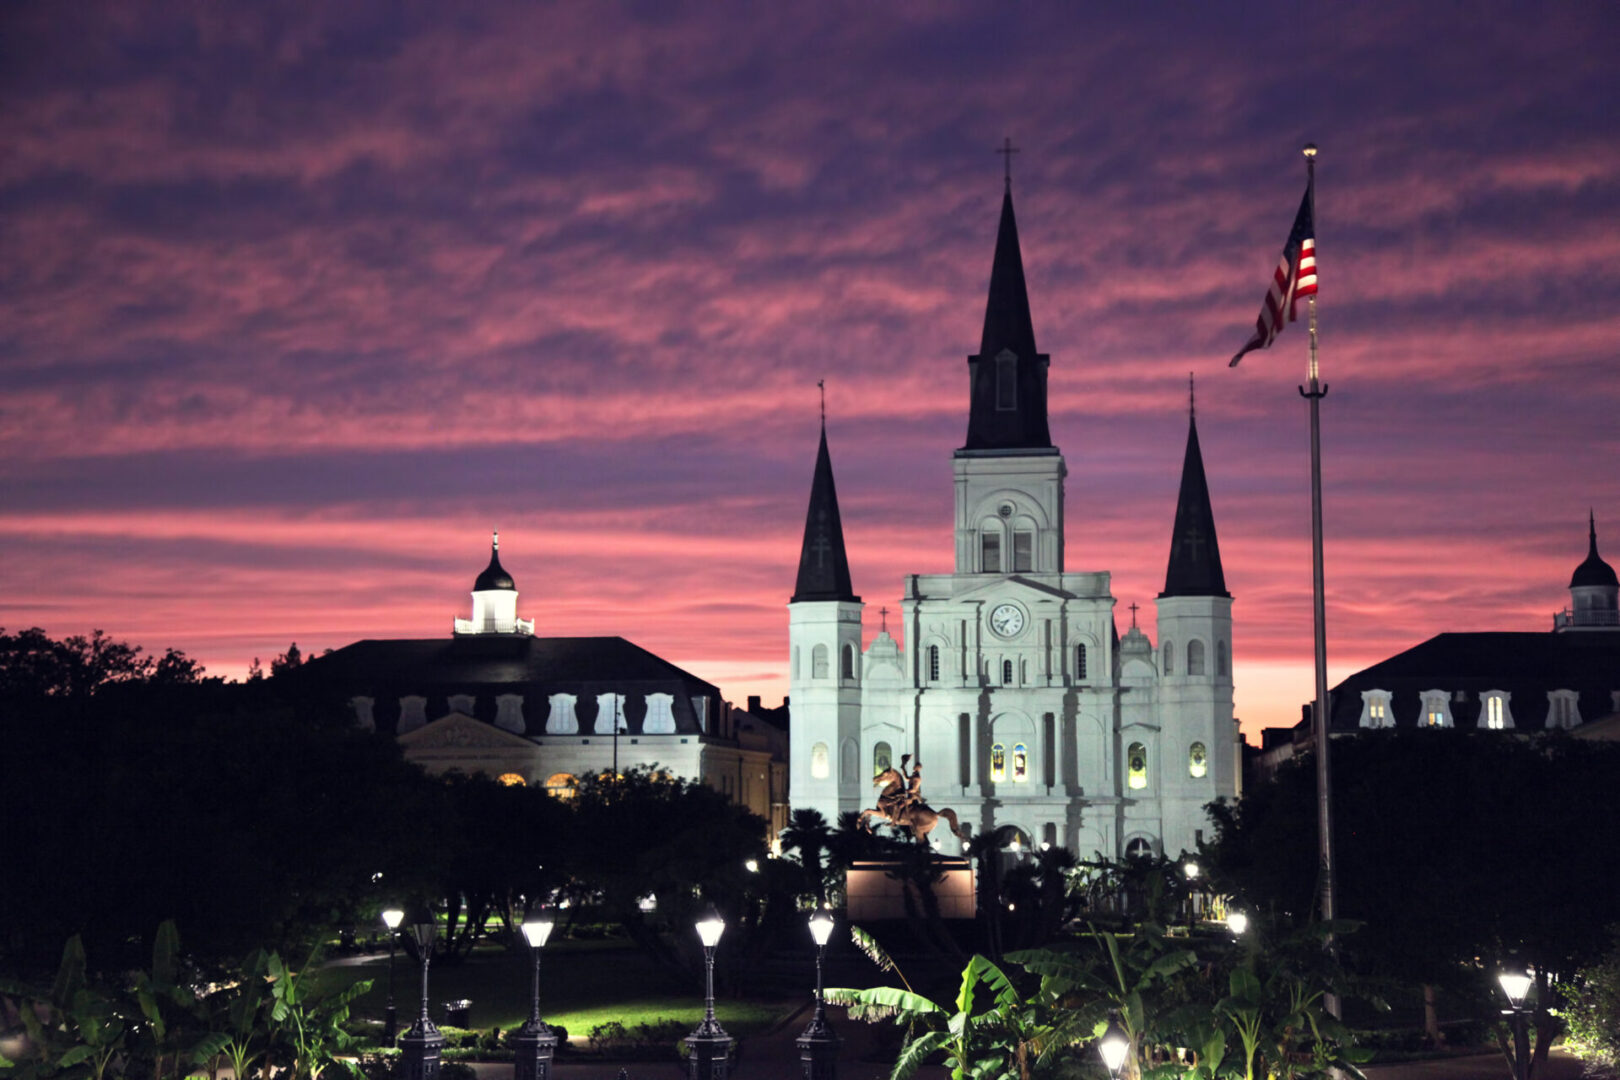 St. Louis Cathedral at Jackson Square at night. New Orleans, Louisiana, USA